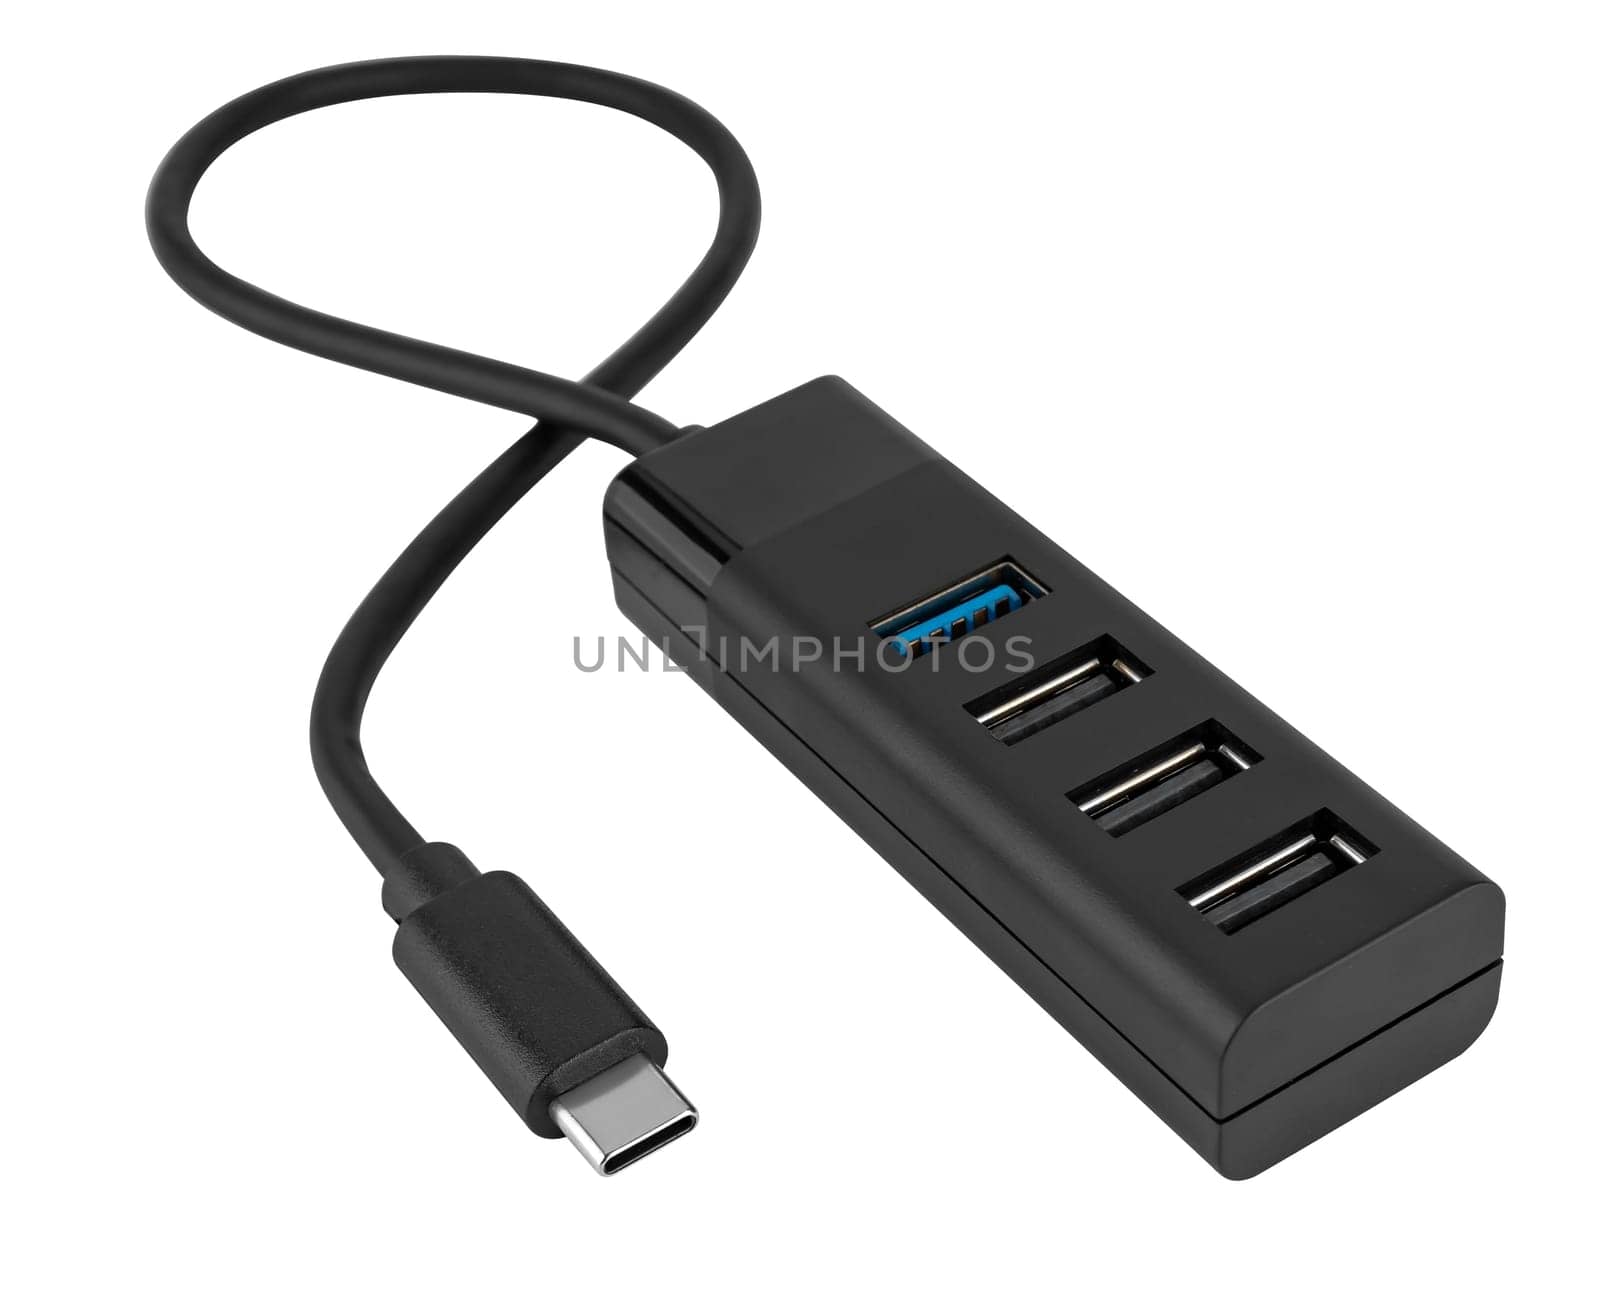 usb-hub adapter cable for computer